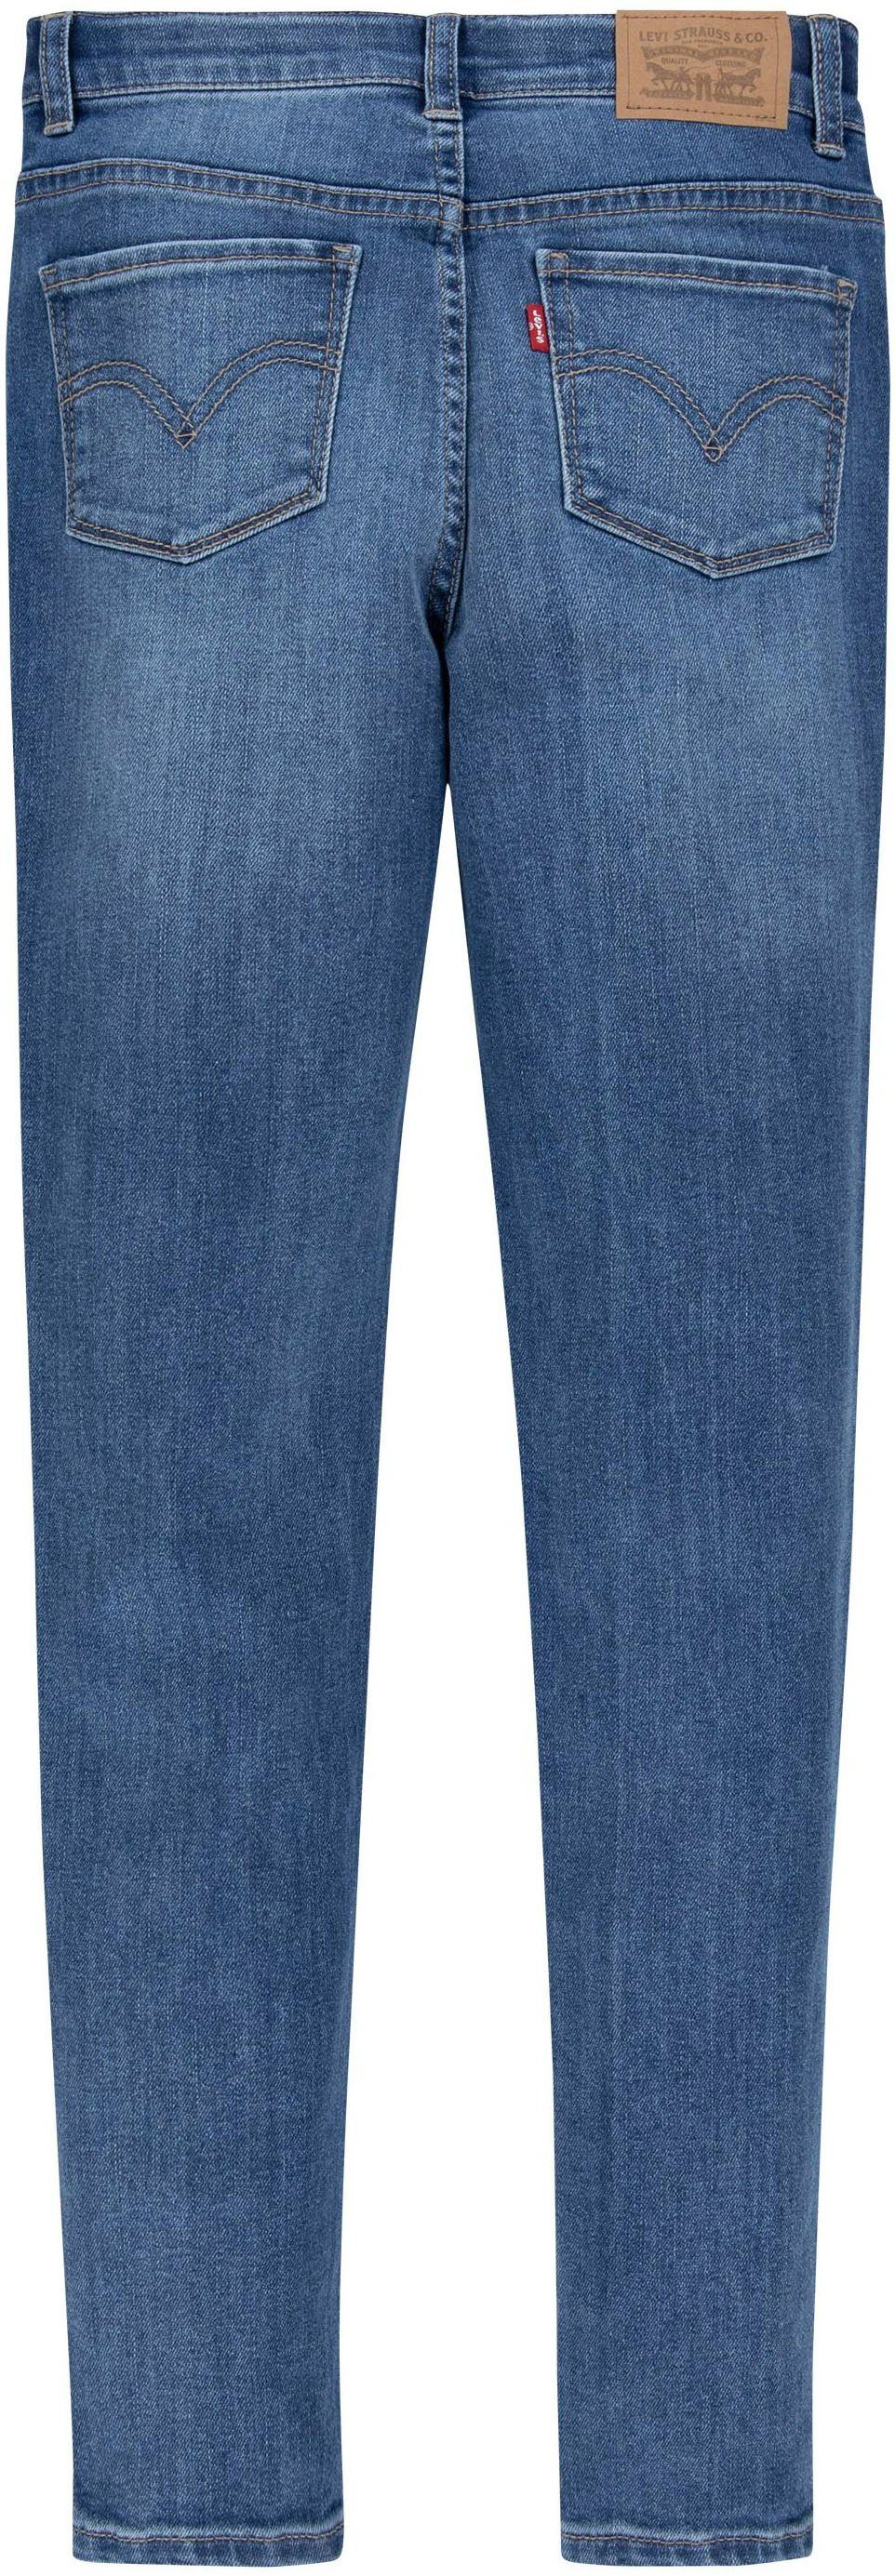 blue Stretch-Jeans SUPER SKINNY GIRLS Kids 720™ for mid Levi's® RISE HIGH used